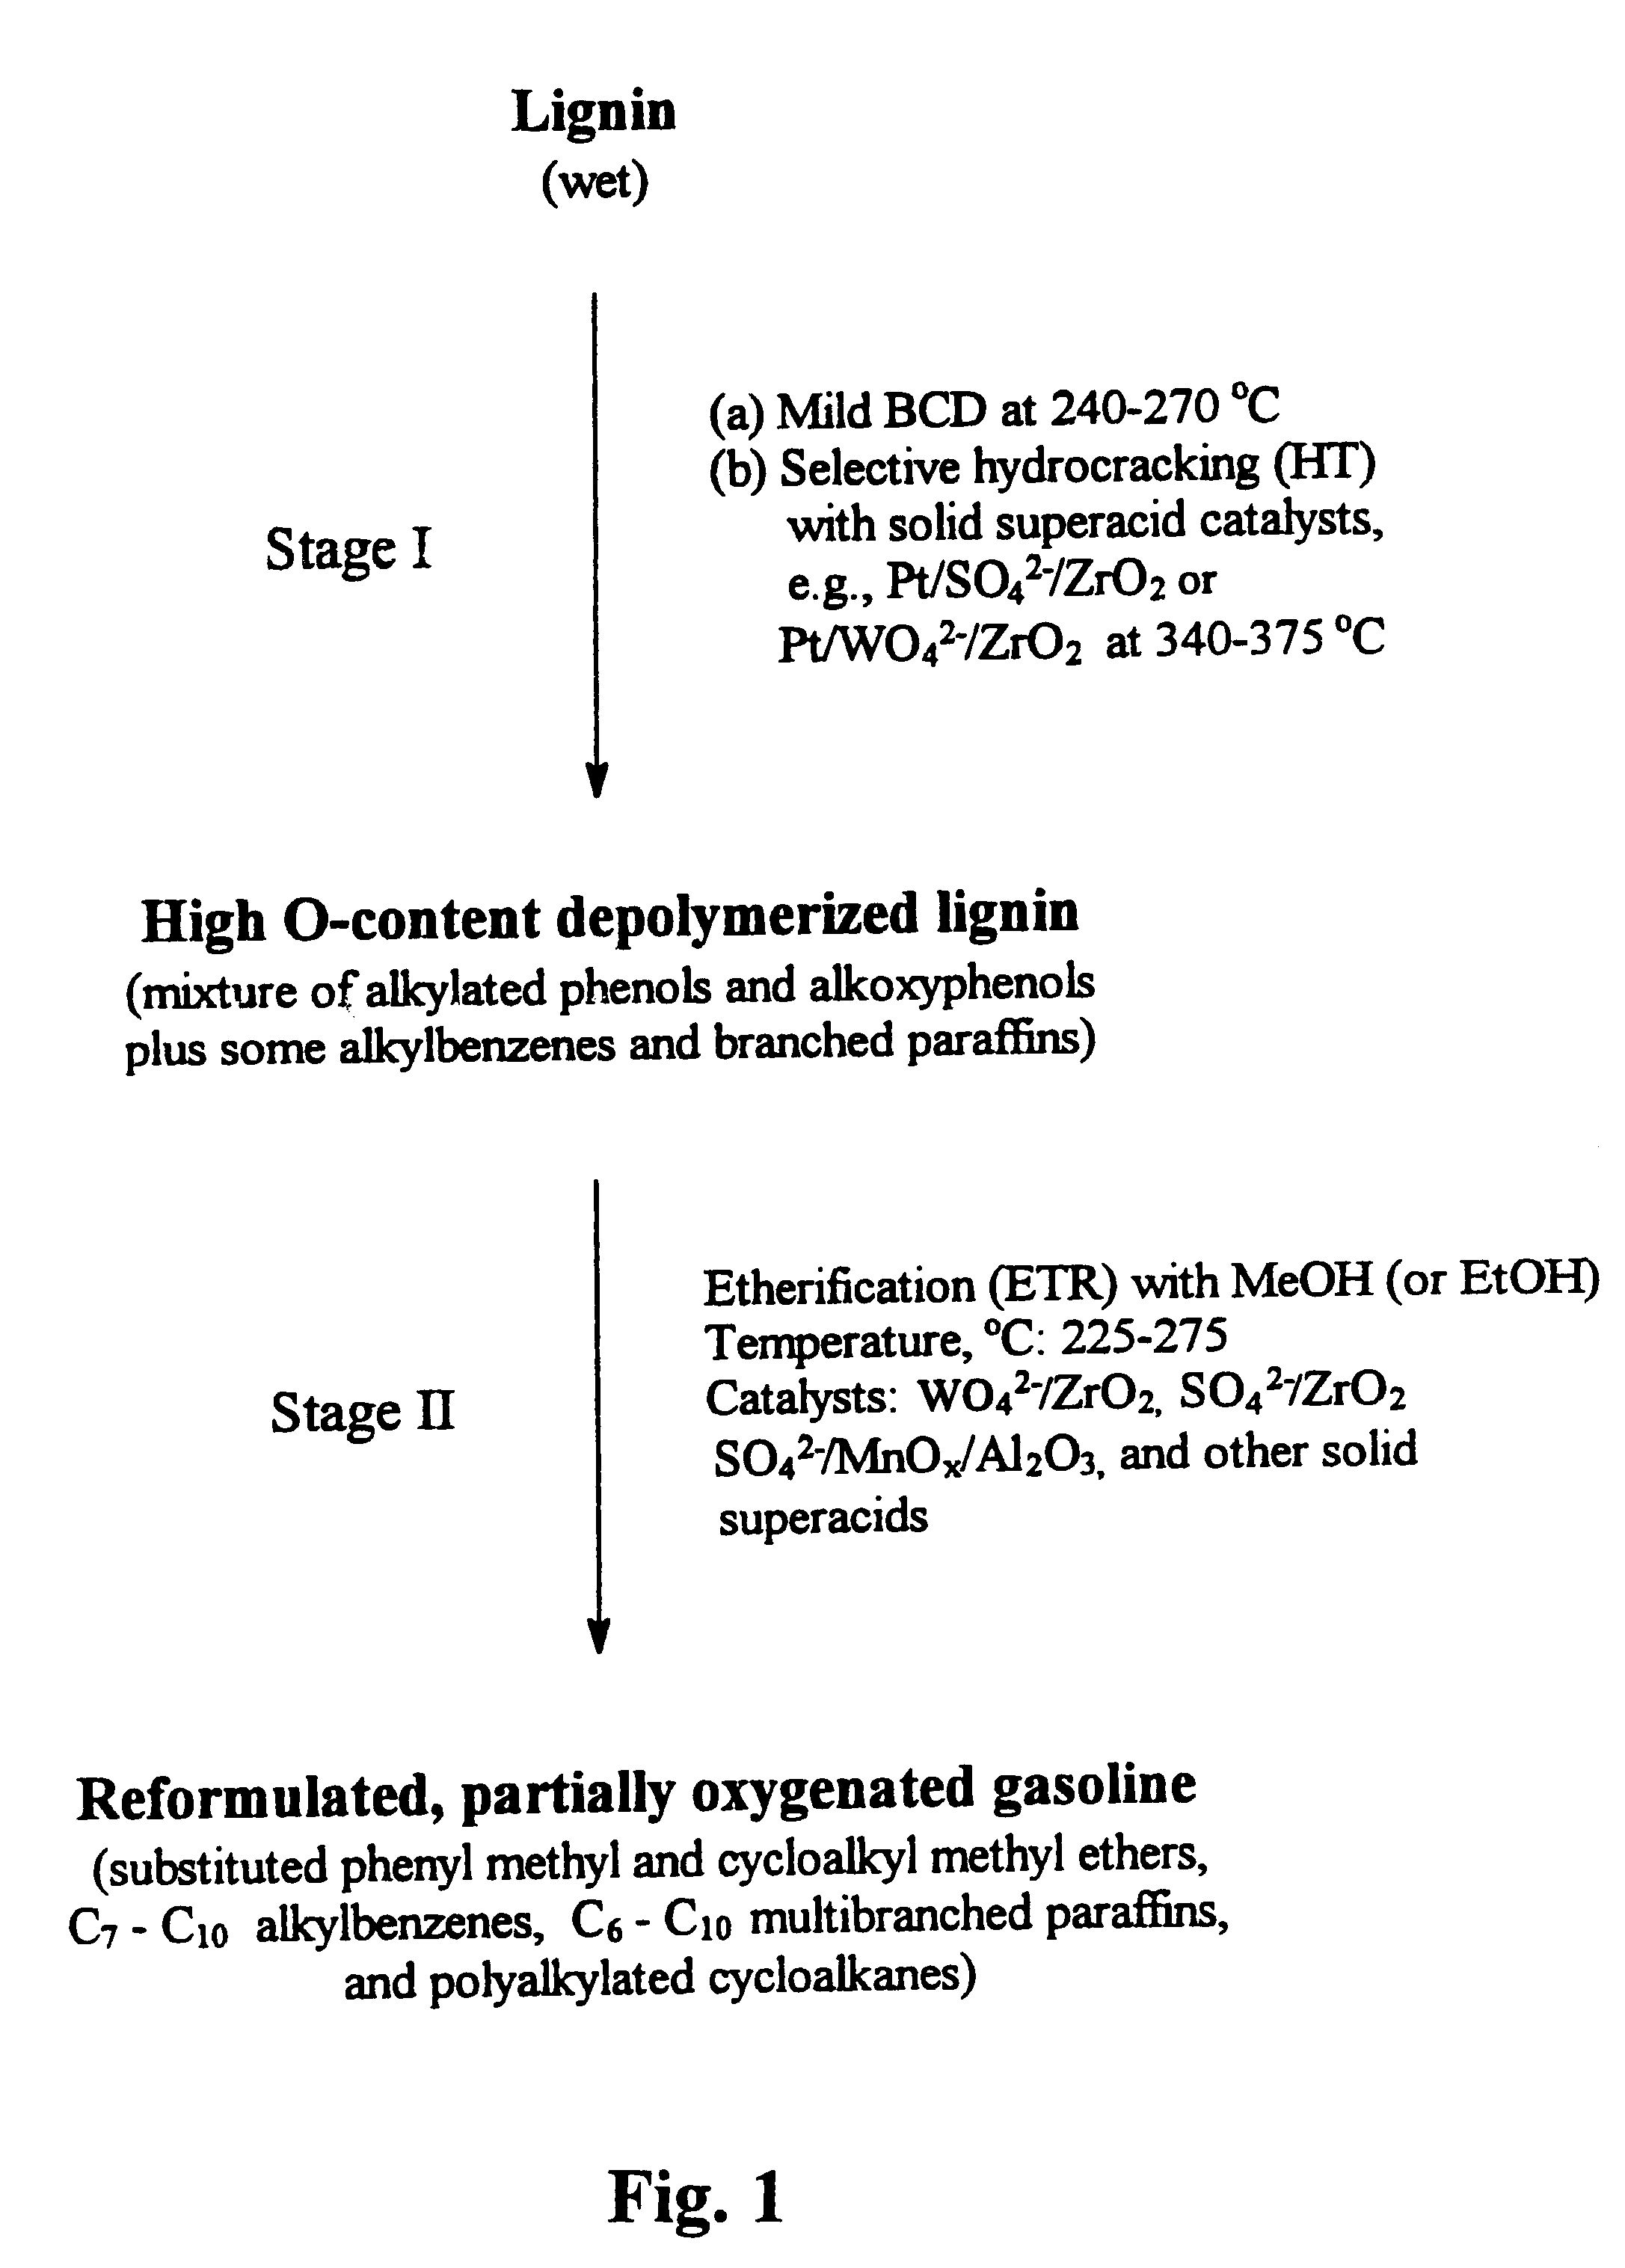 Process for conversion of lignin to reformulated, partially oxygenated gasoline